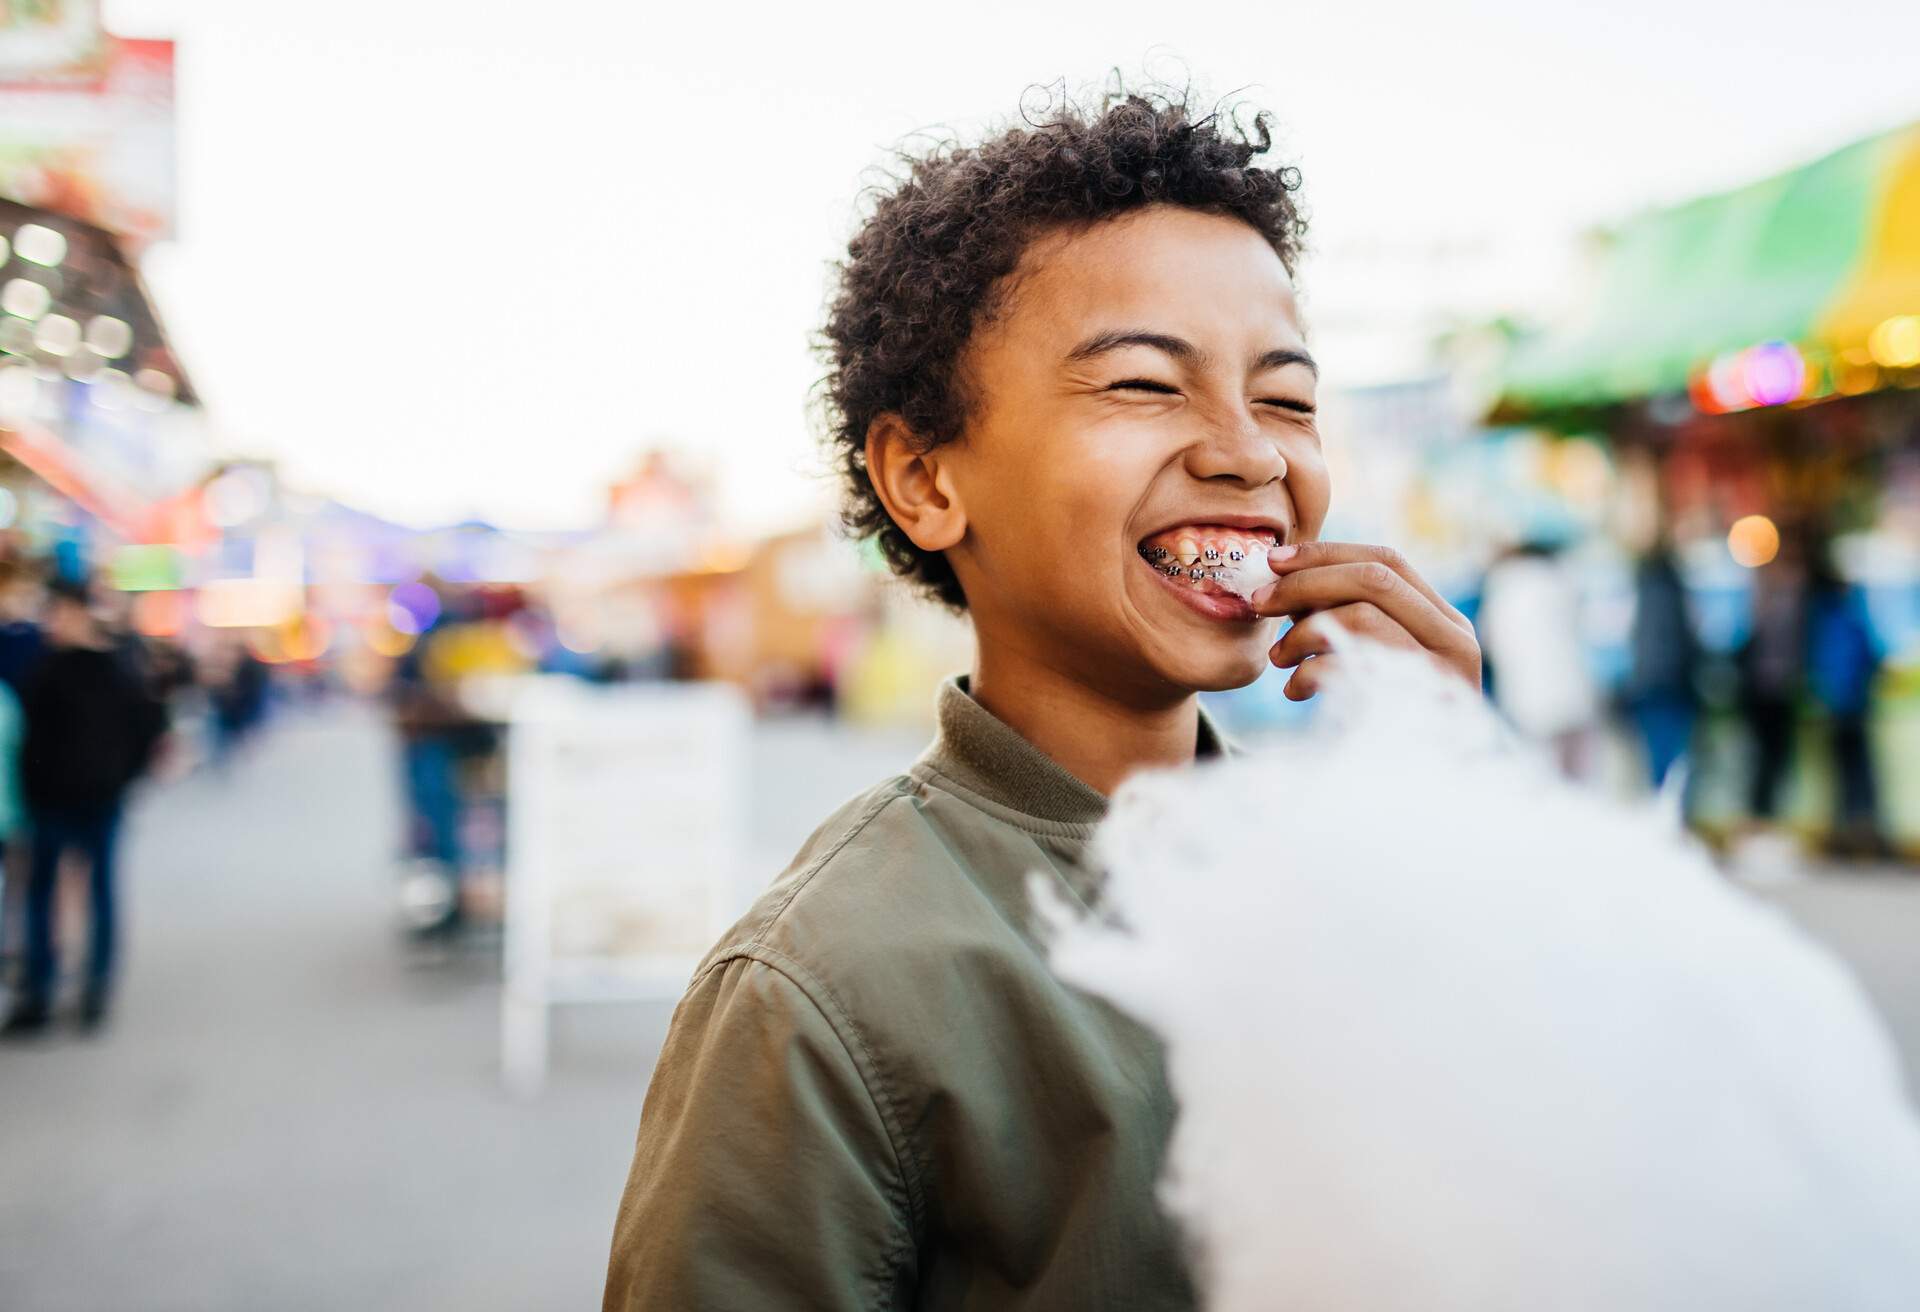 A young boy with braces on his teeth smiling while eating candy floss at the fun fair.